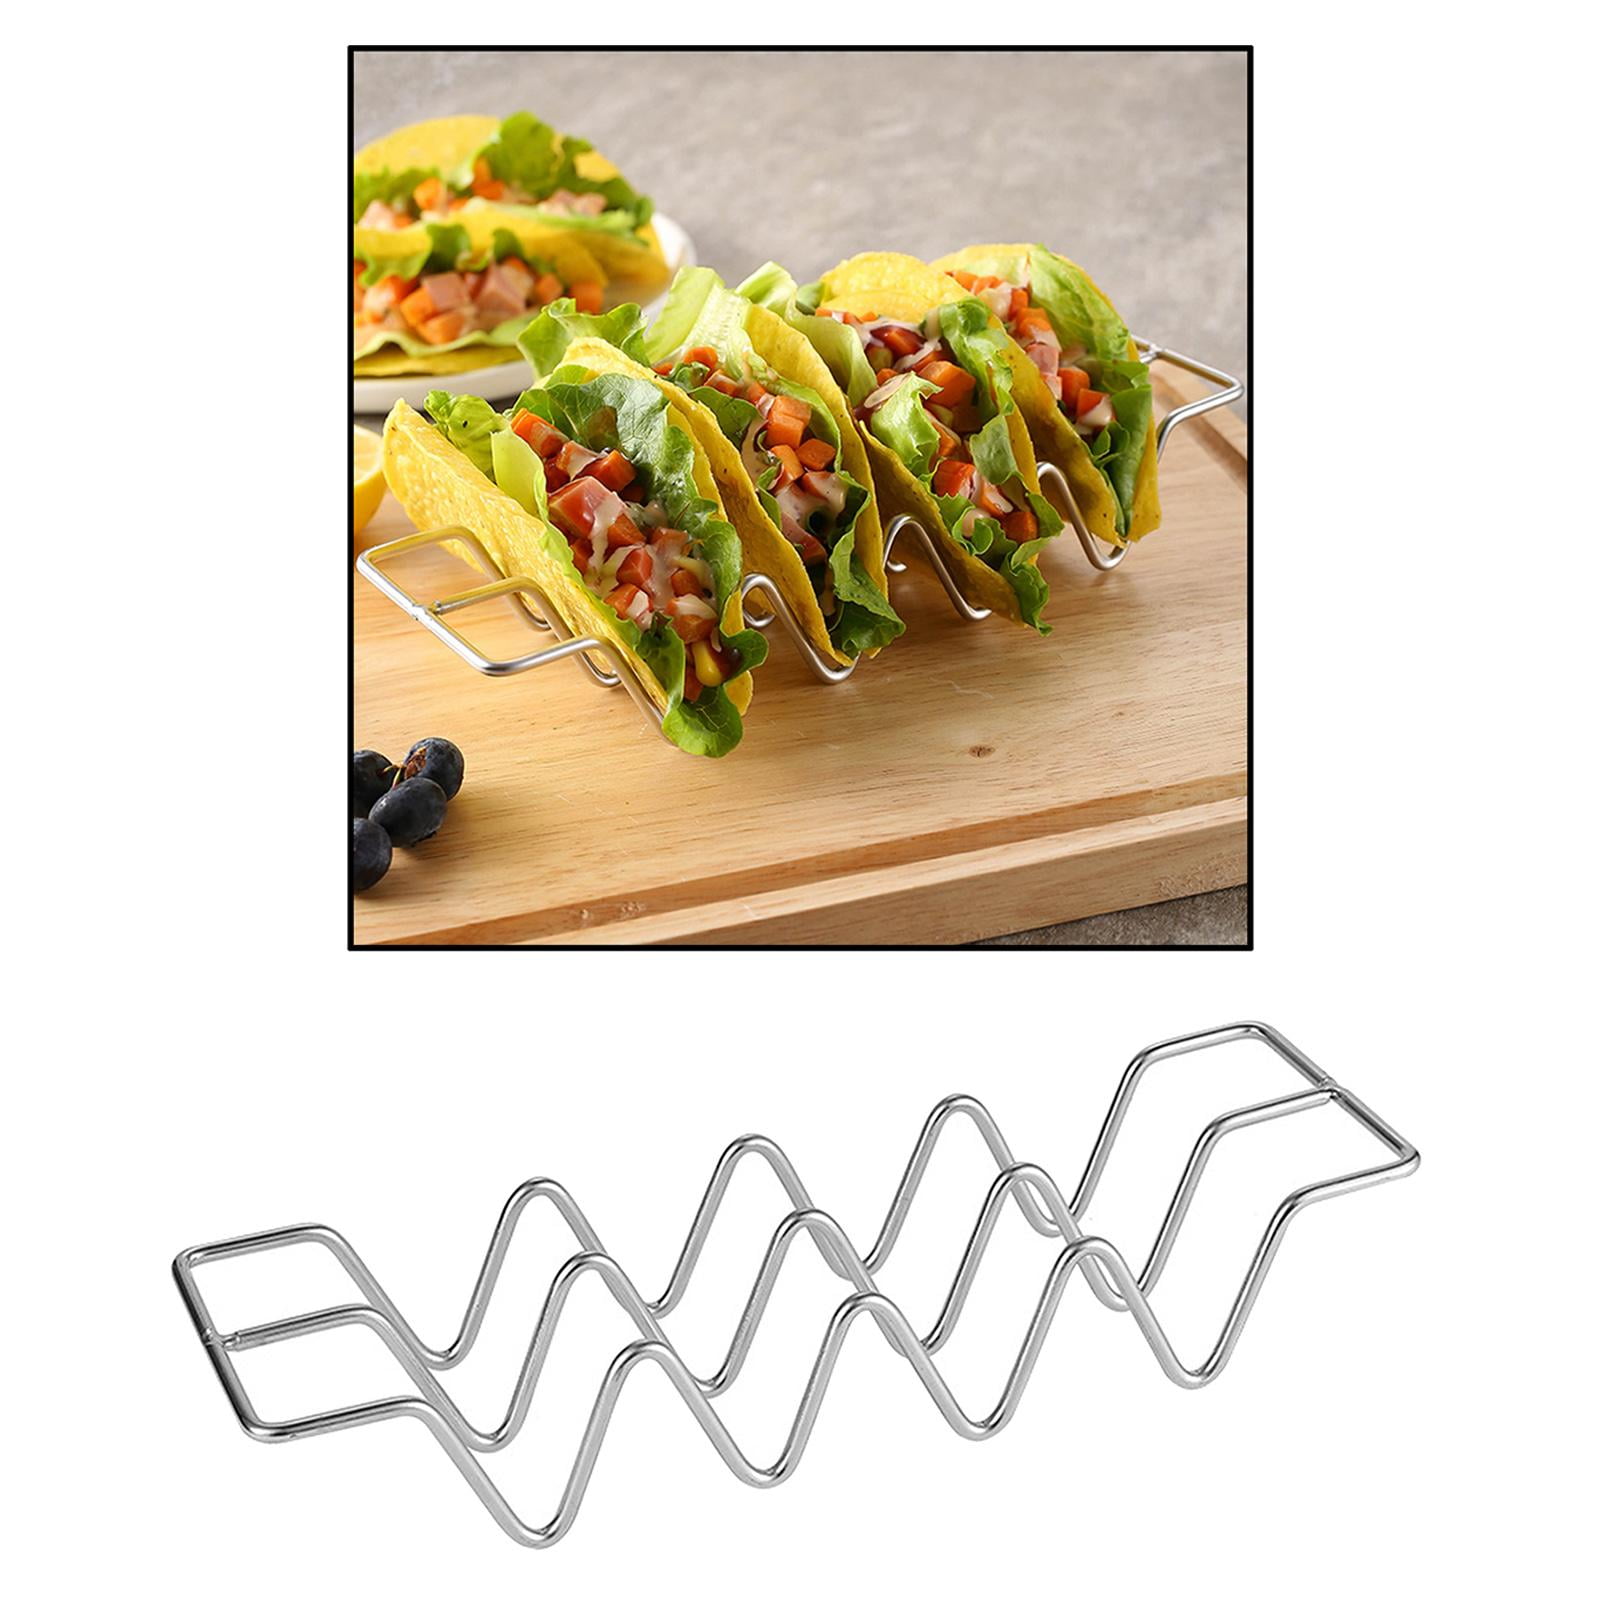 Stainless steel Taco Rack BBQ Grill Baked Taco Mexican Food Pie Holder Cooking  Accessories Barbecue Household